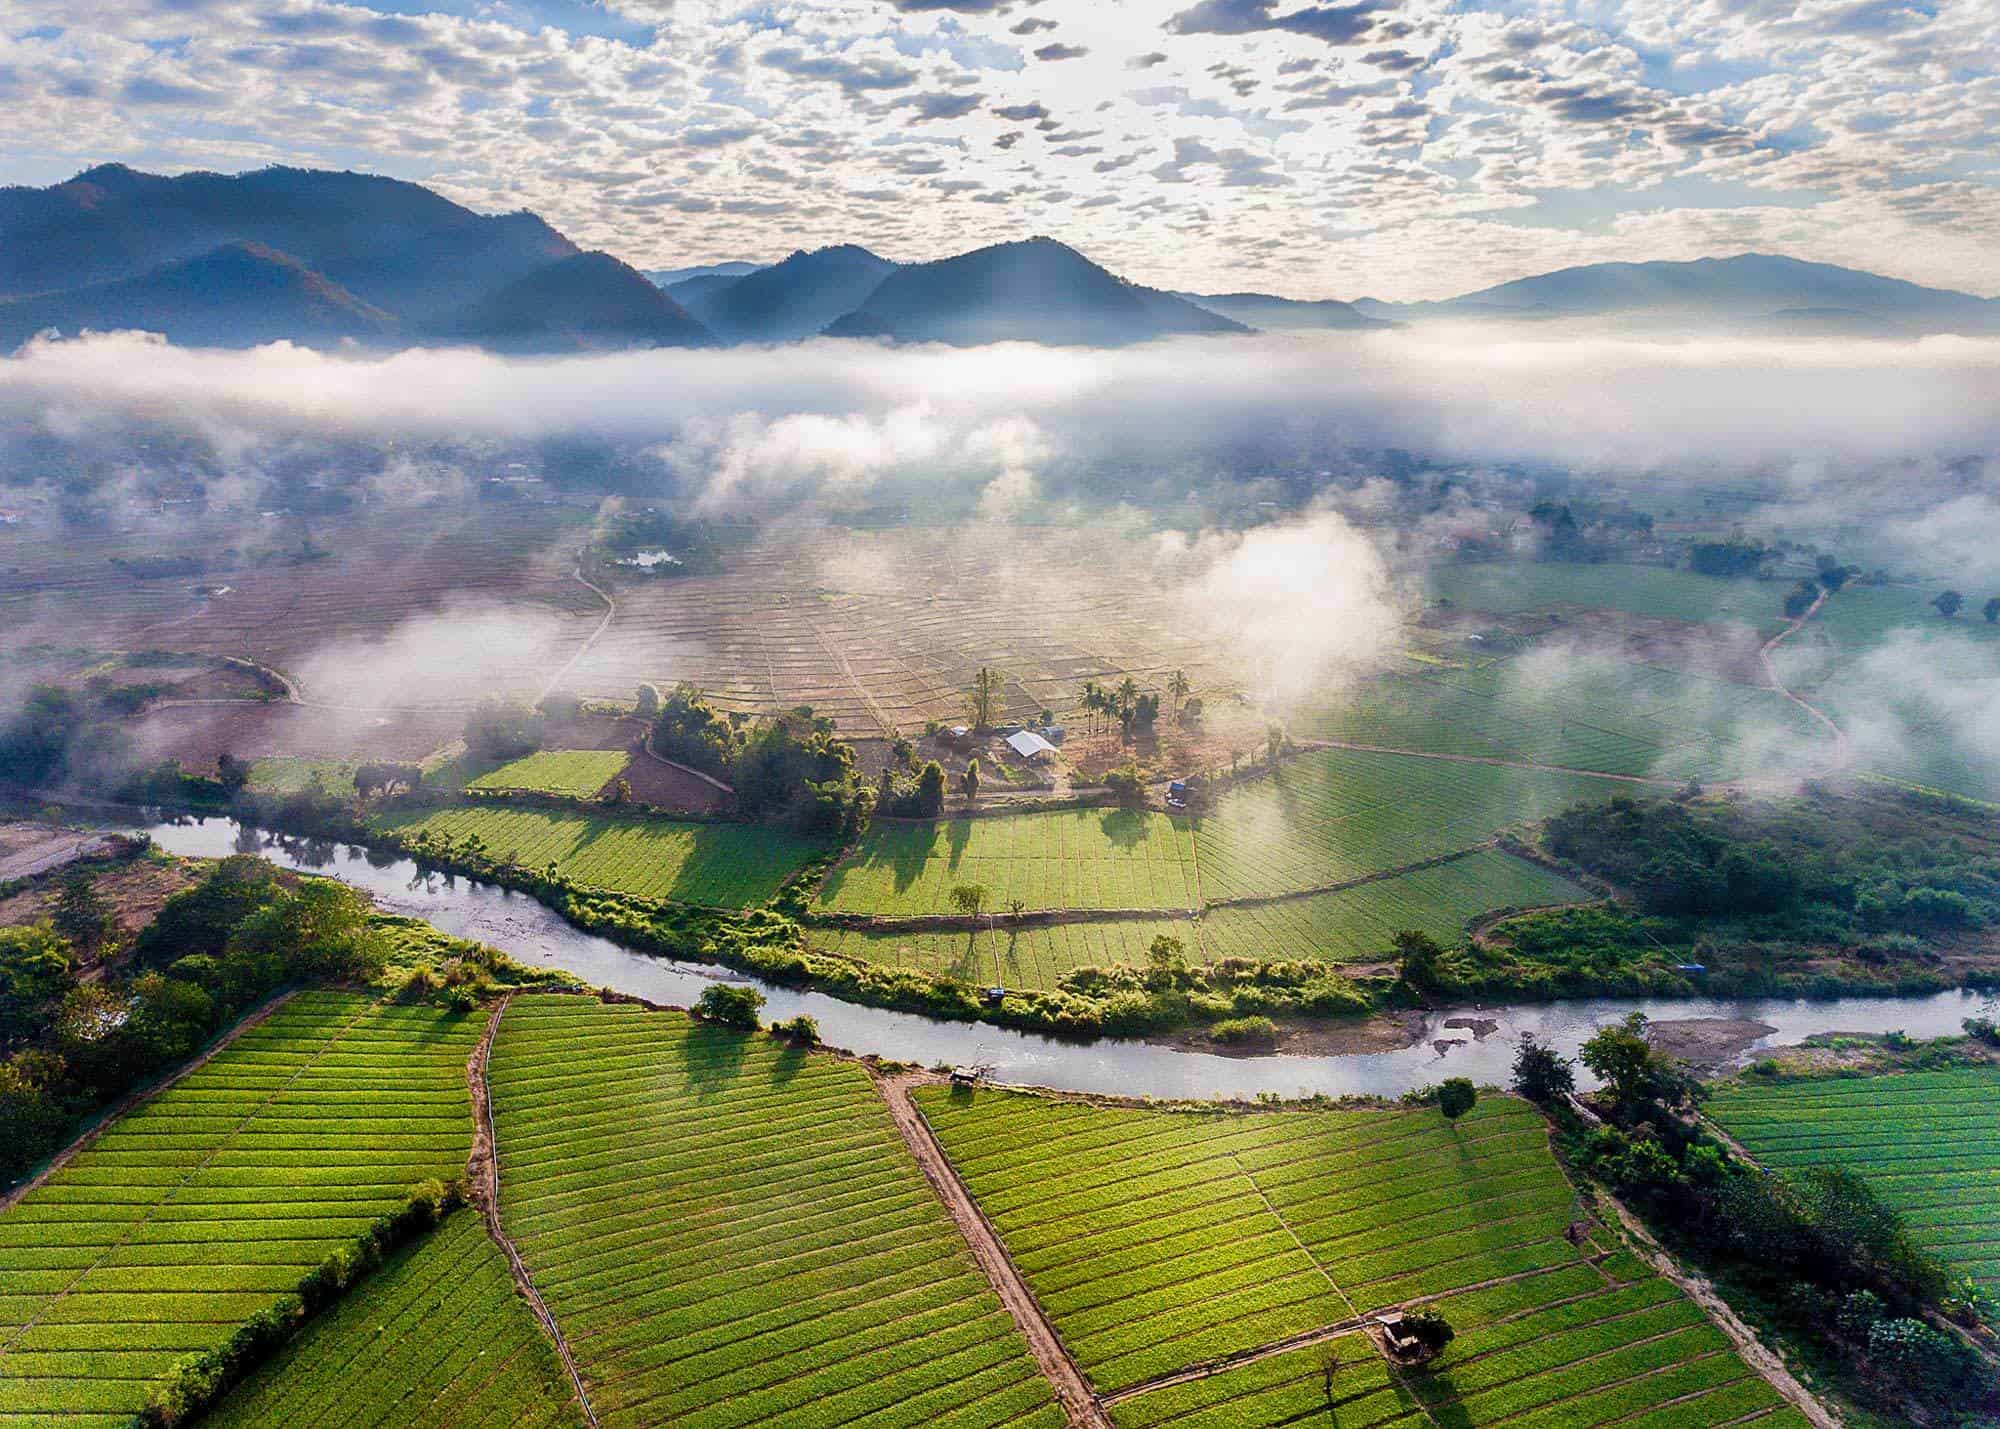 17 EPIC Things to Do in Pai, Thailand [2022 Guide]